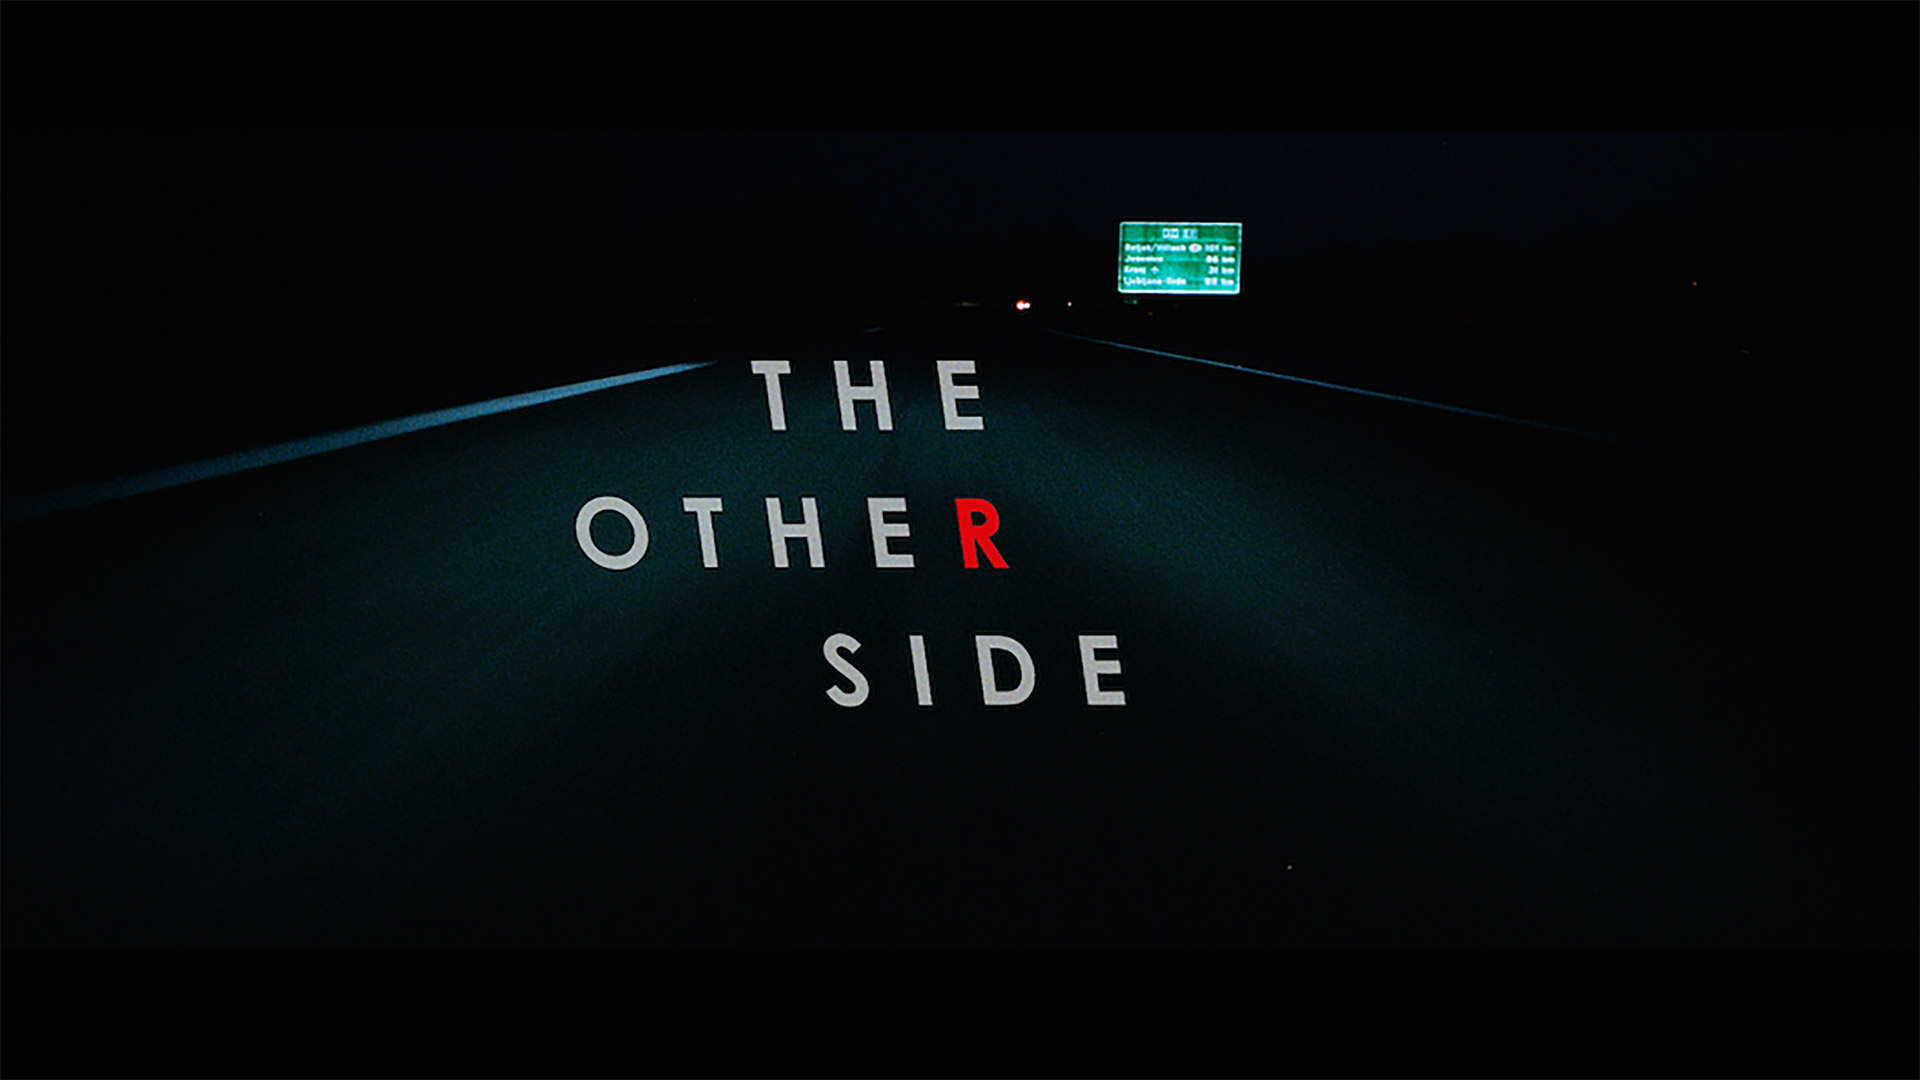 The Other Side